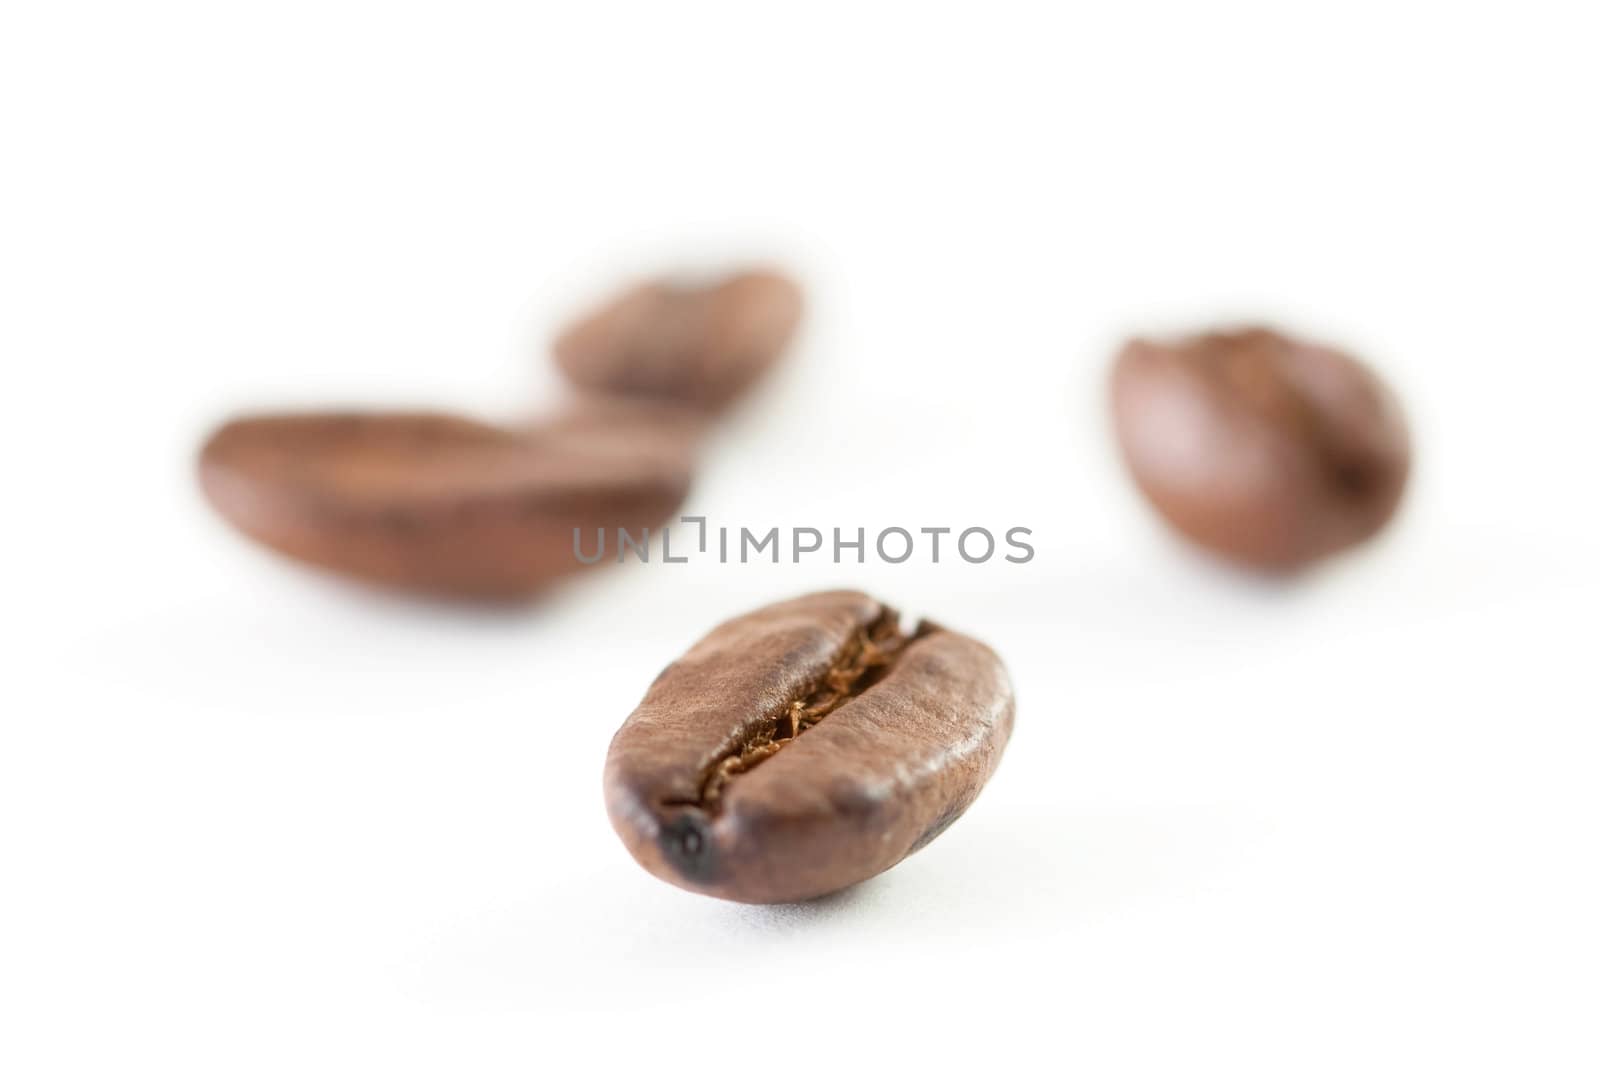 A close up shoot of some coffee beans isolated on white background